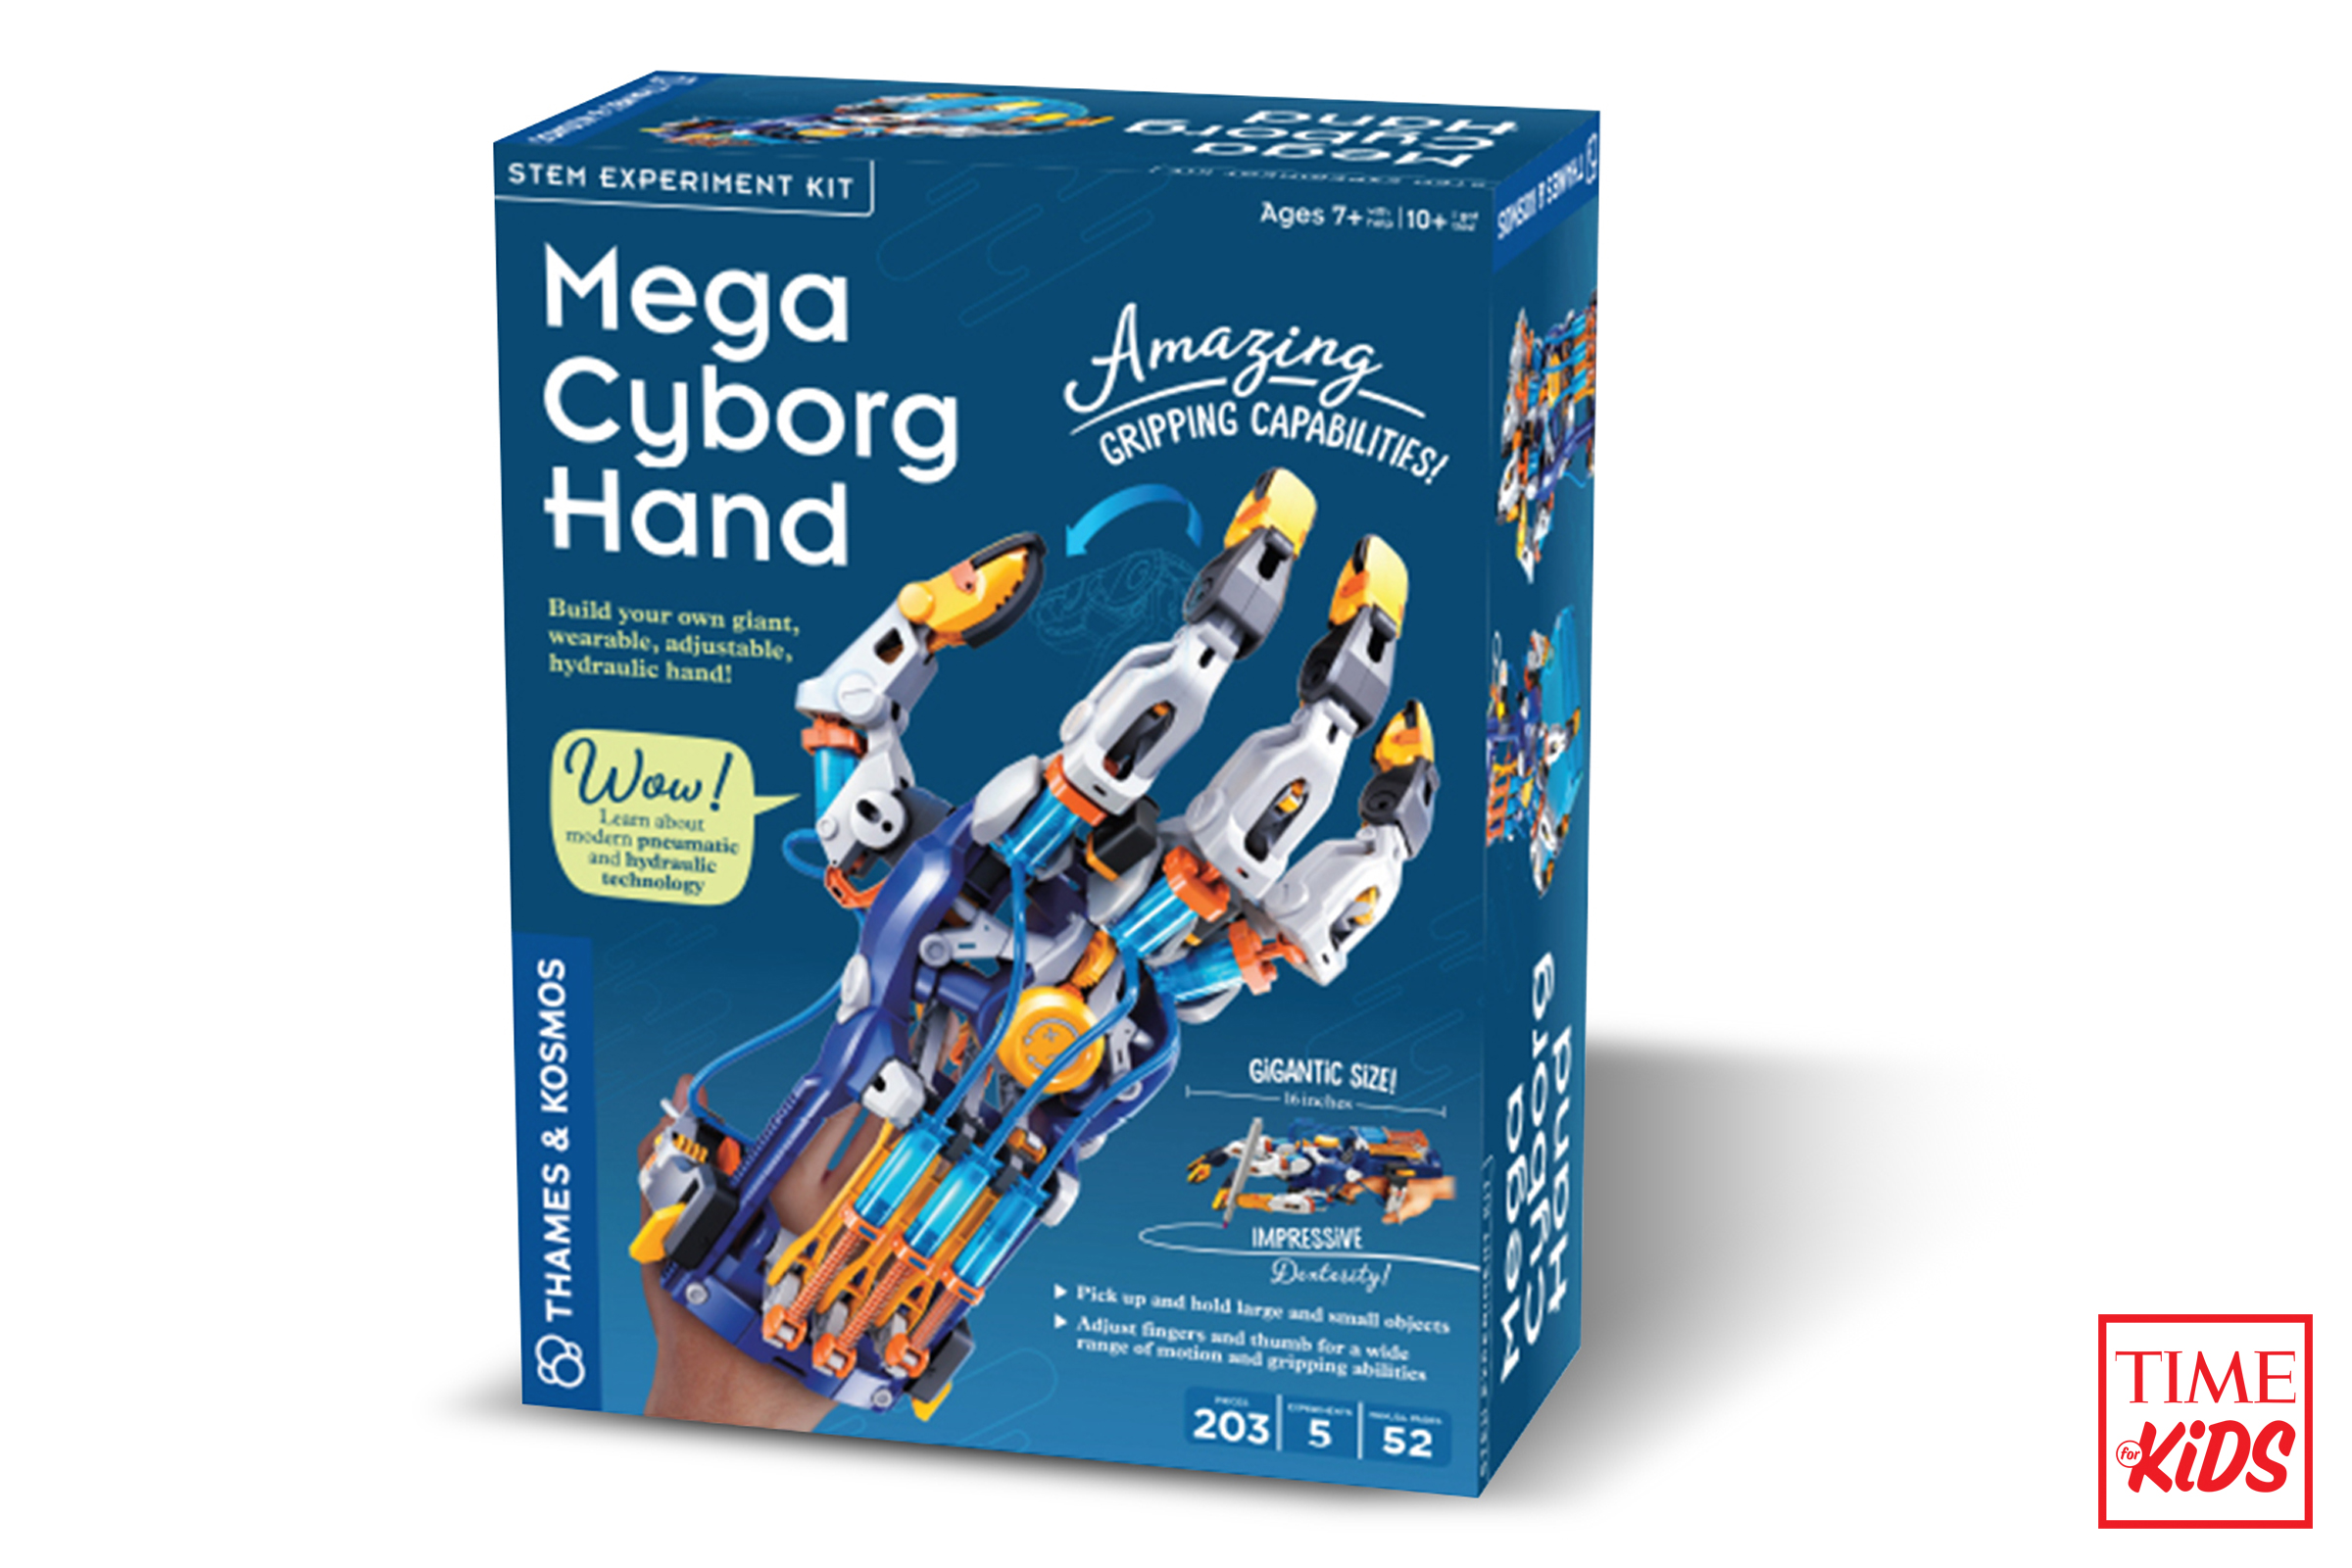 Picture of Mega Cyborg Hand for toy guide.